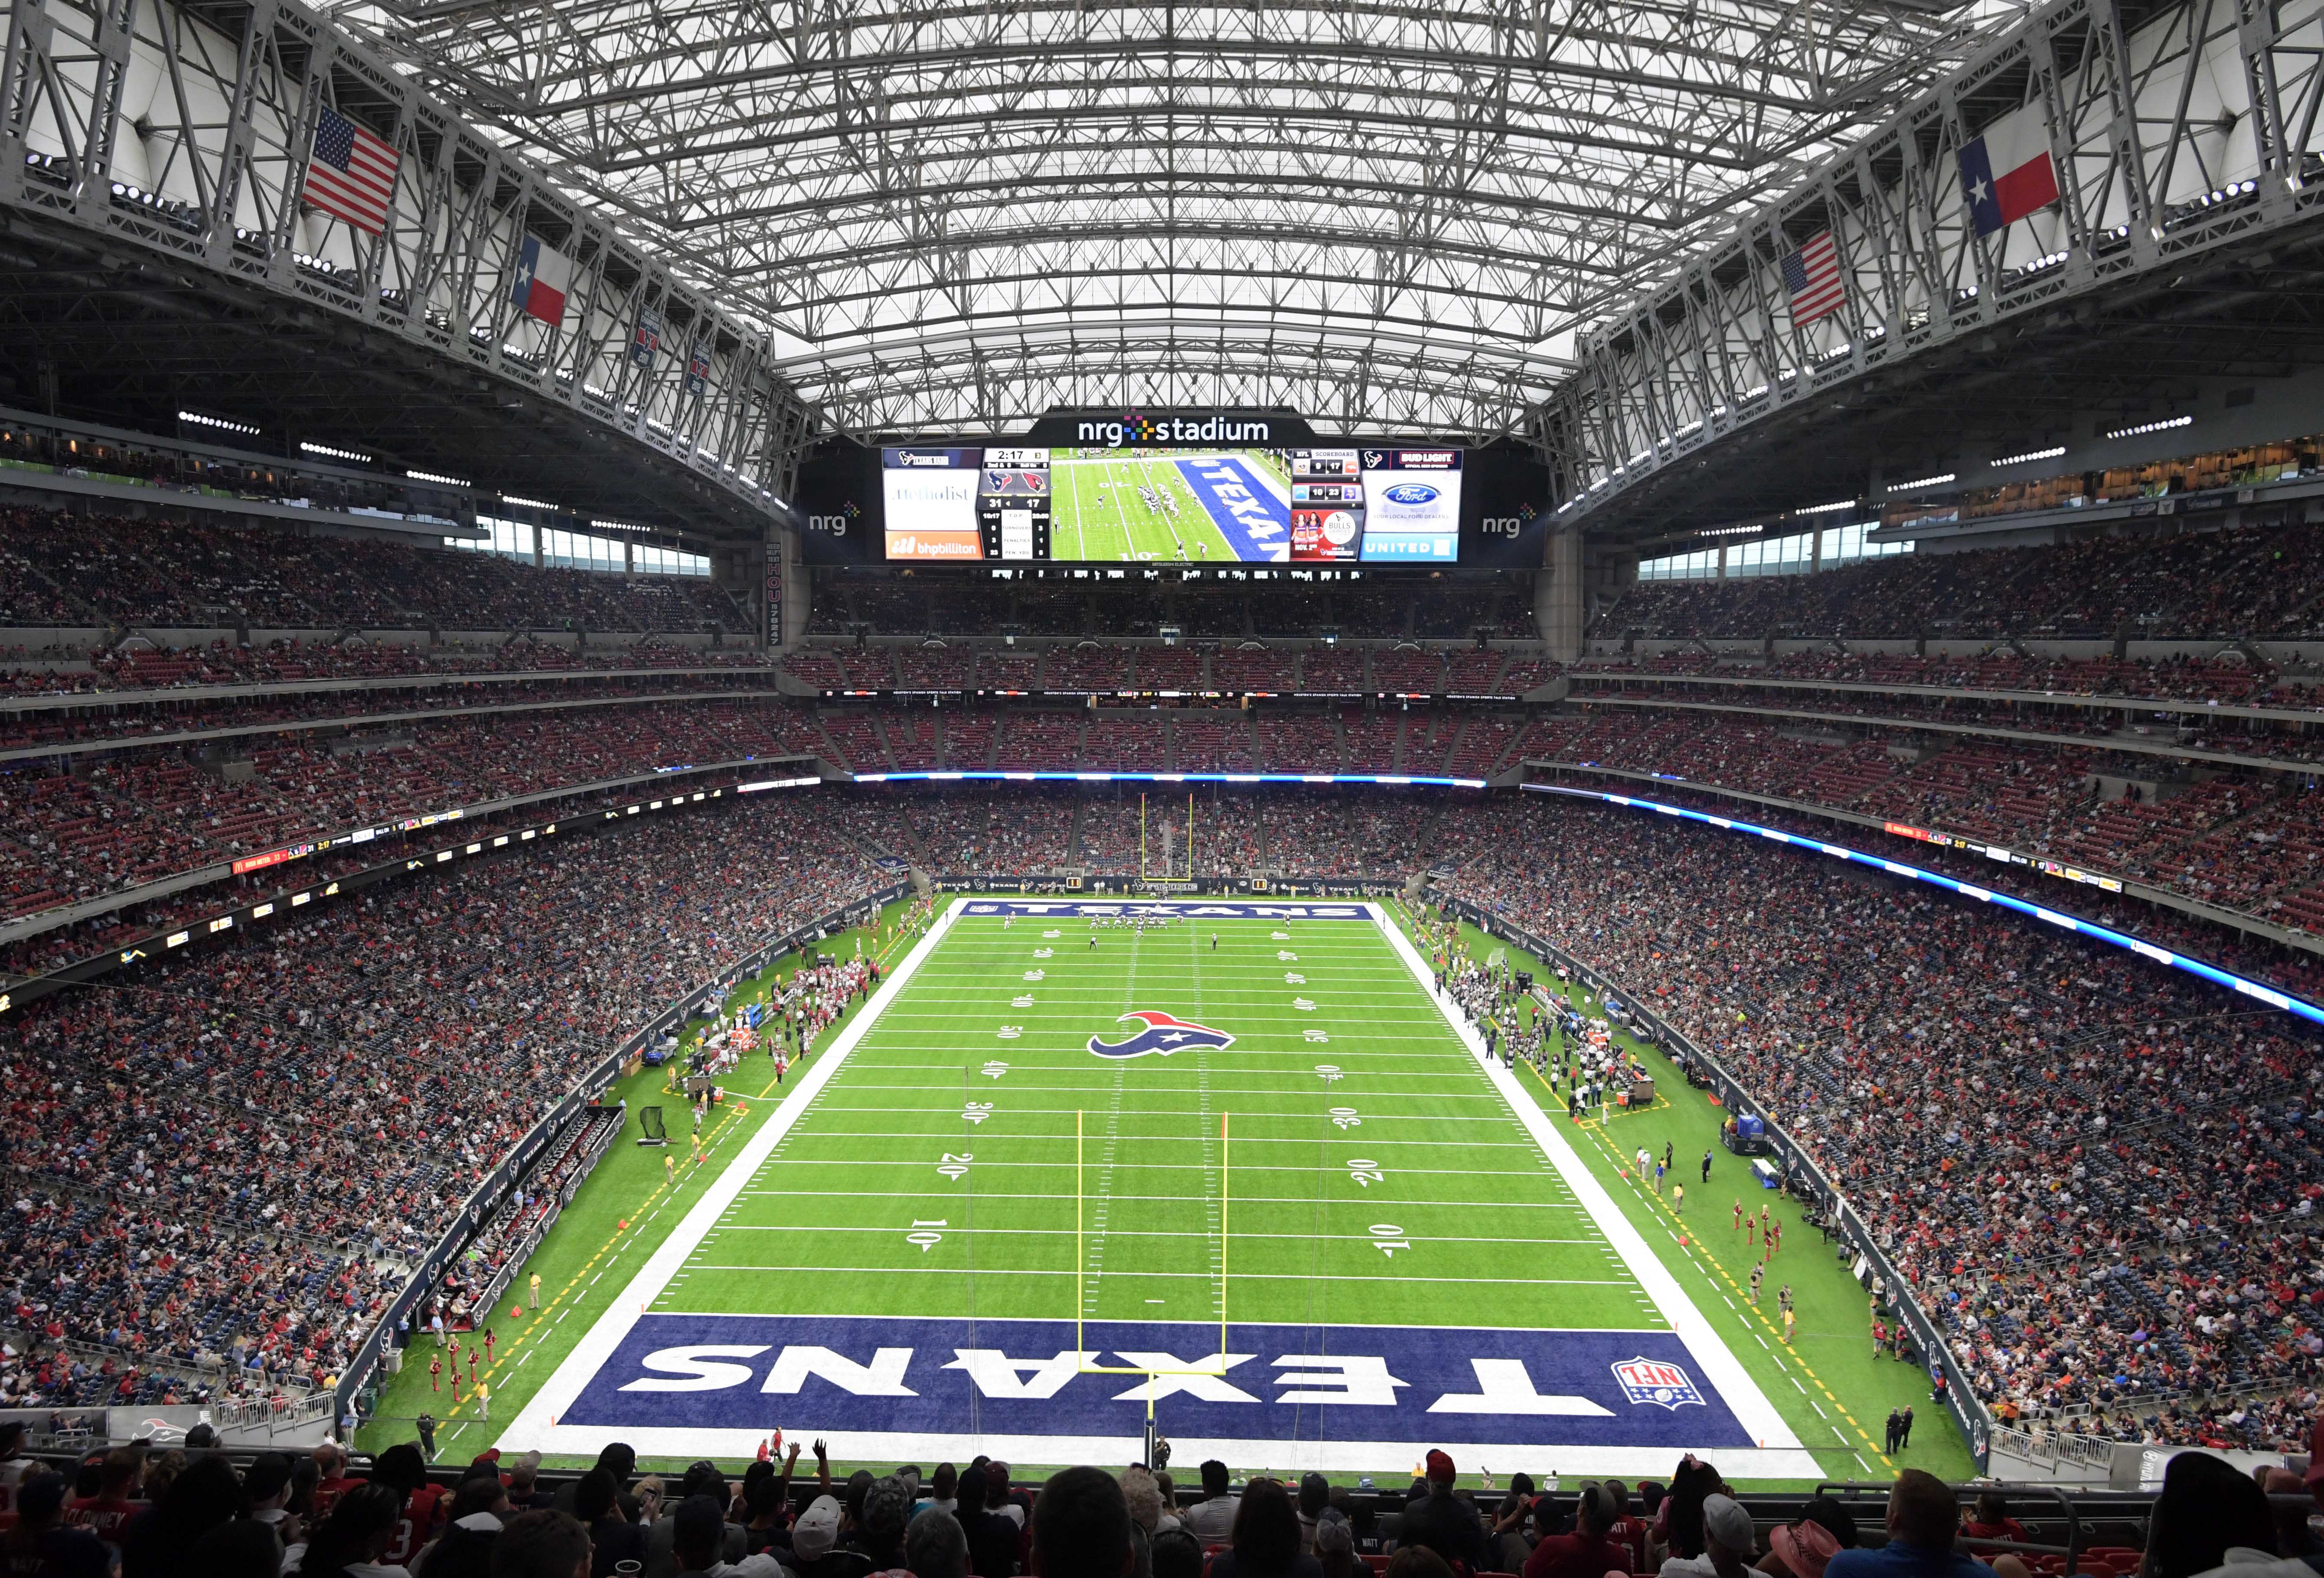 For more than a dozen players, the days of running out of the tunnel at NRG Stadium are likely at an end.